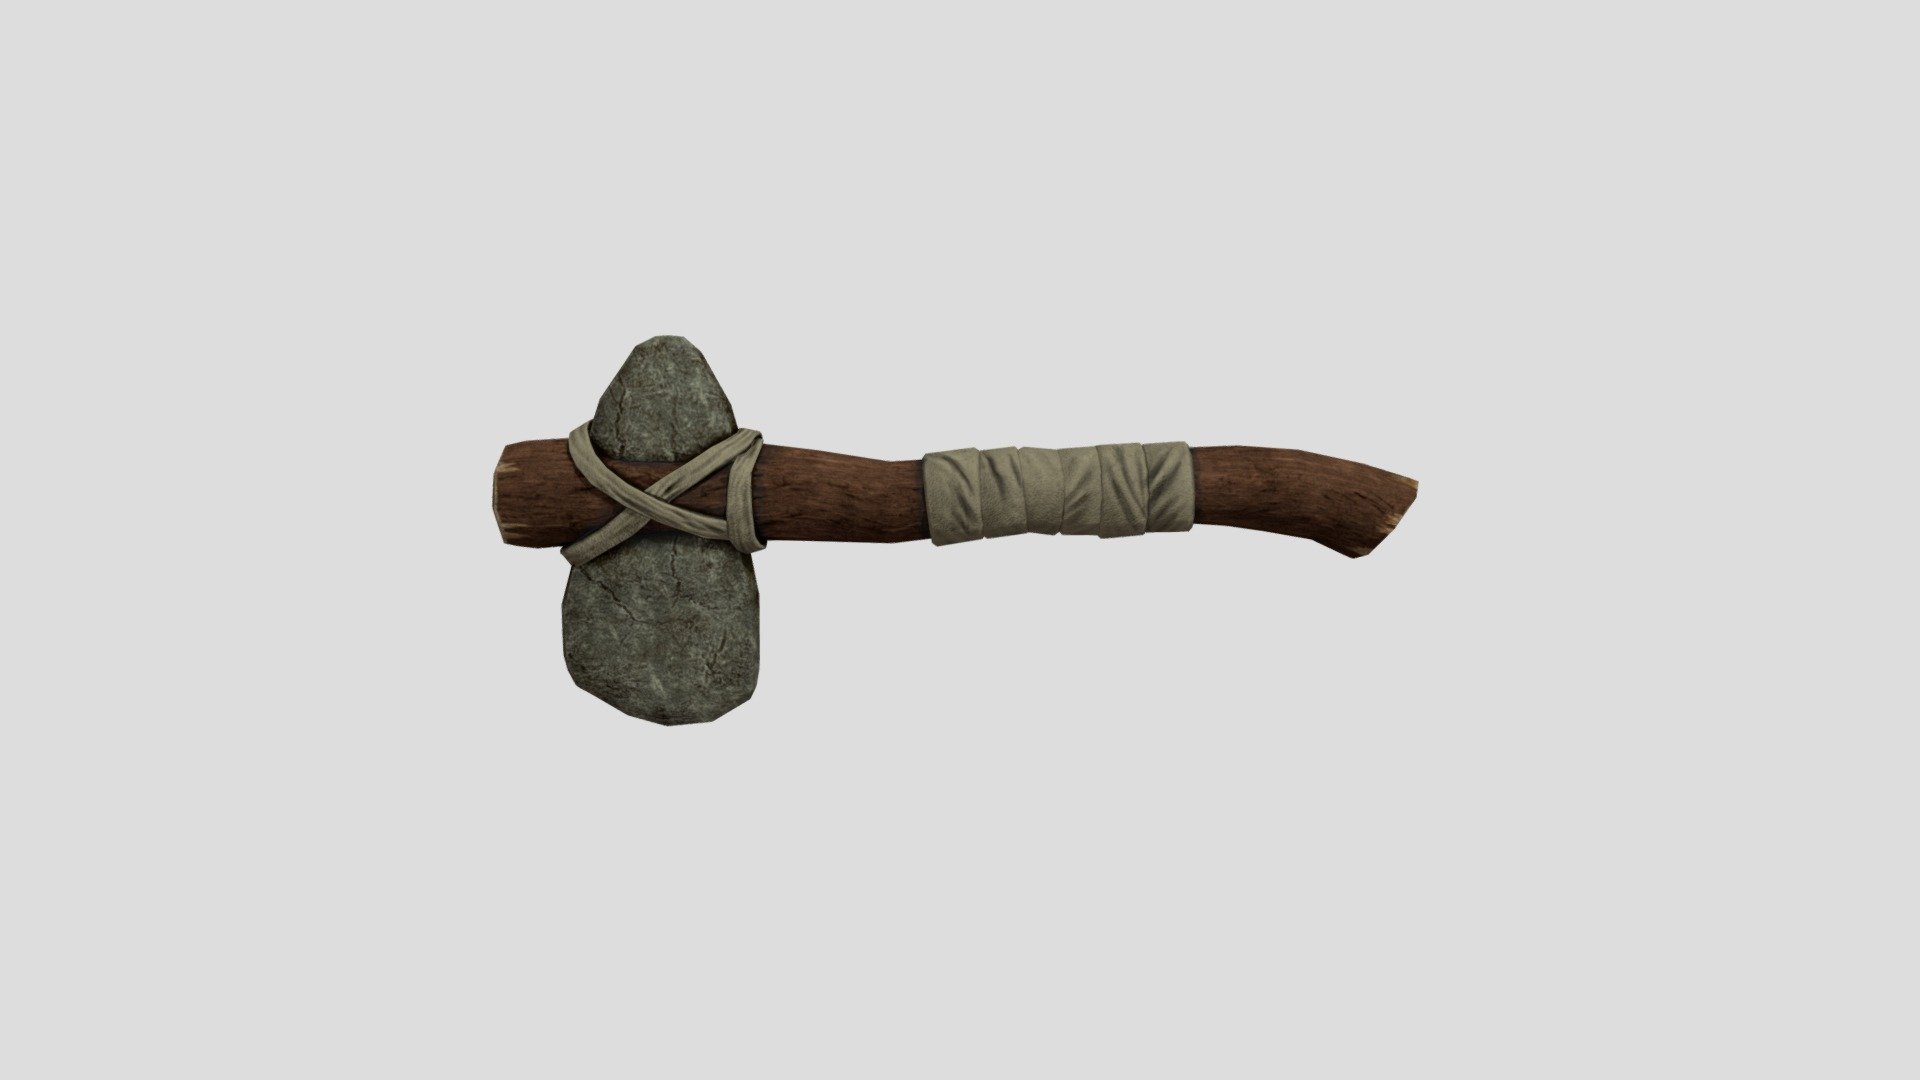 New model of a homemade ax made of wood and stone - Hatchet (Axe) - 3D model by Eubrim 3d model